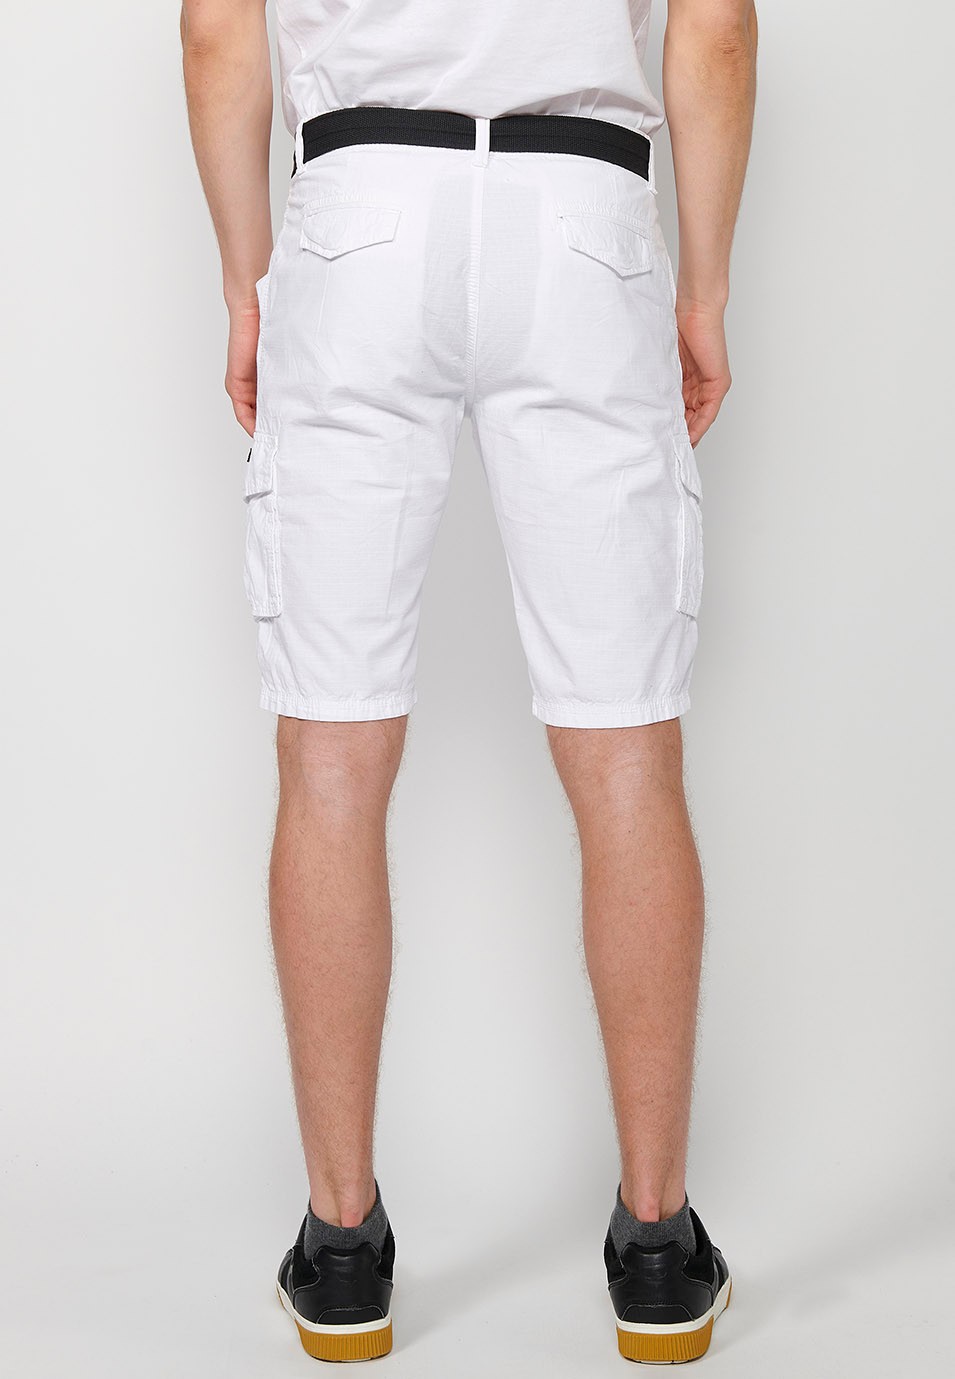 Cotton cargo shorts with belt and front closure with zipper and button with pockets, two back pockets with flap and two cargo pants in White for Men 5